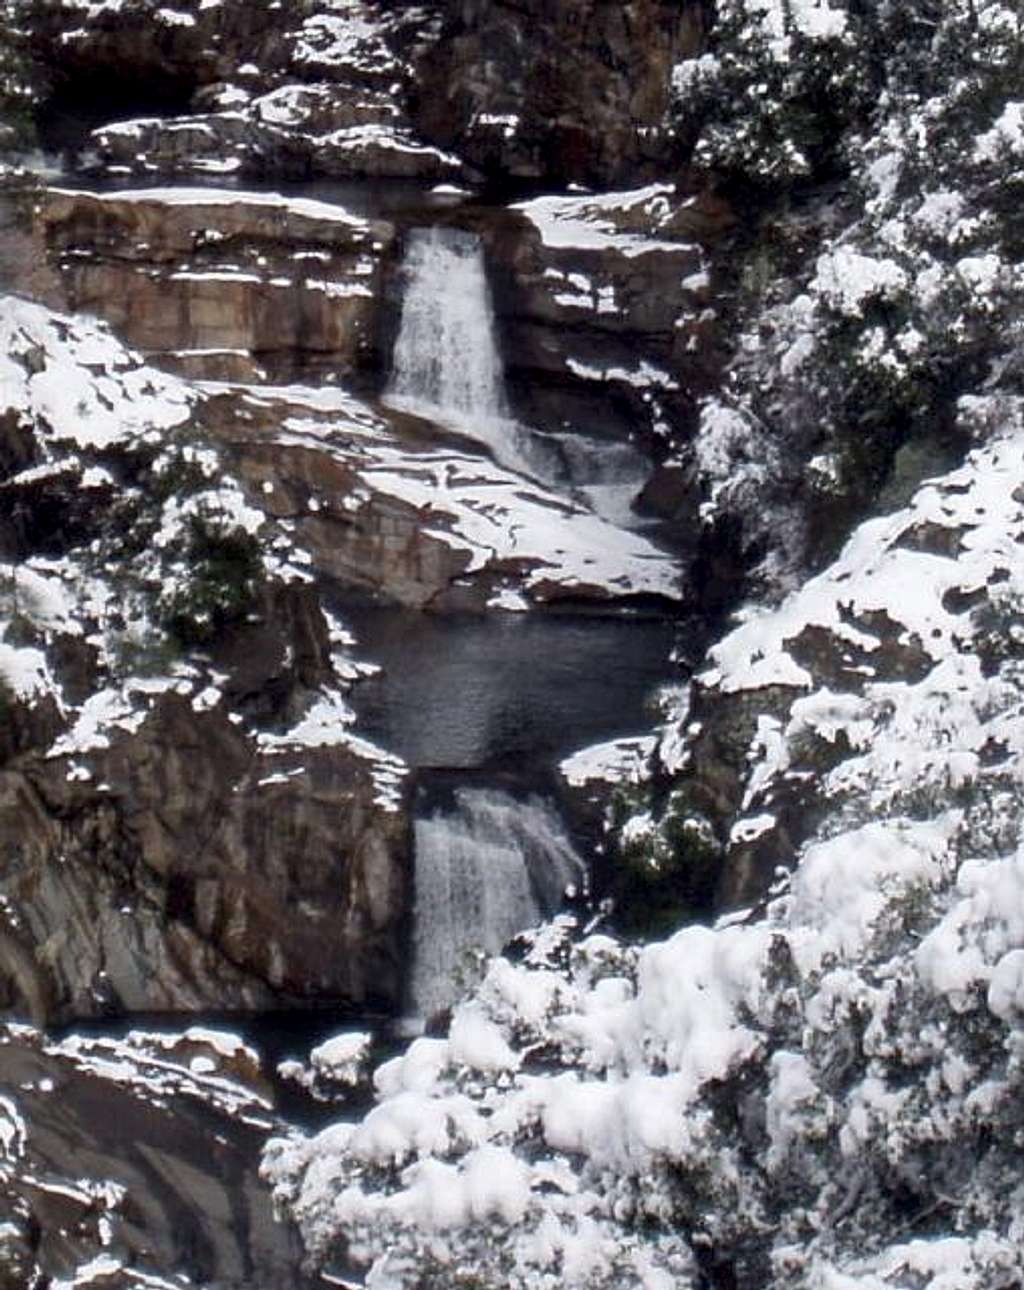 Marble Falls in the Winter